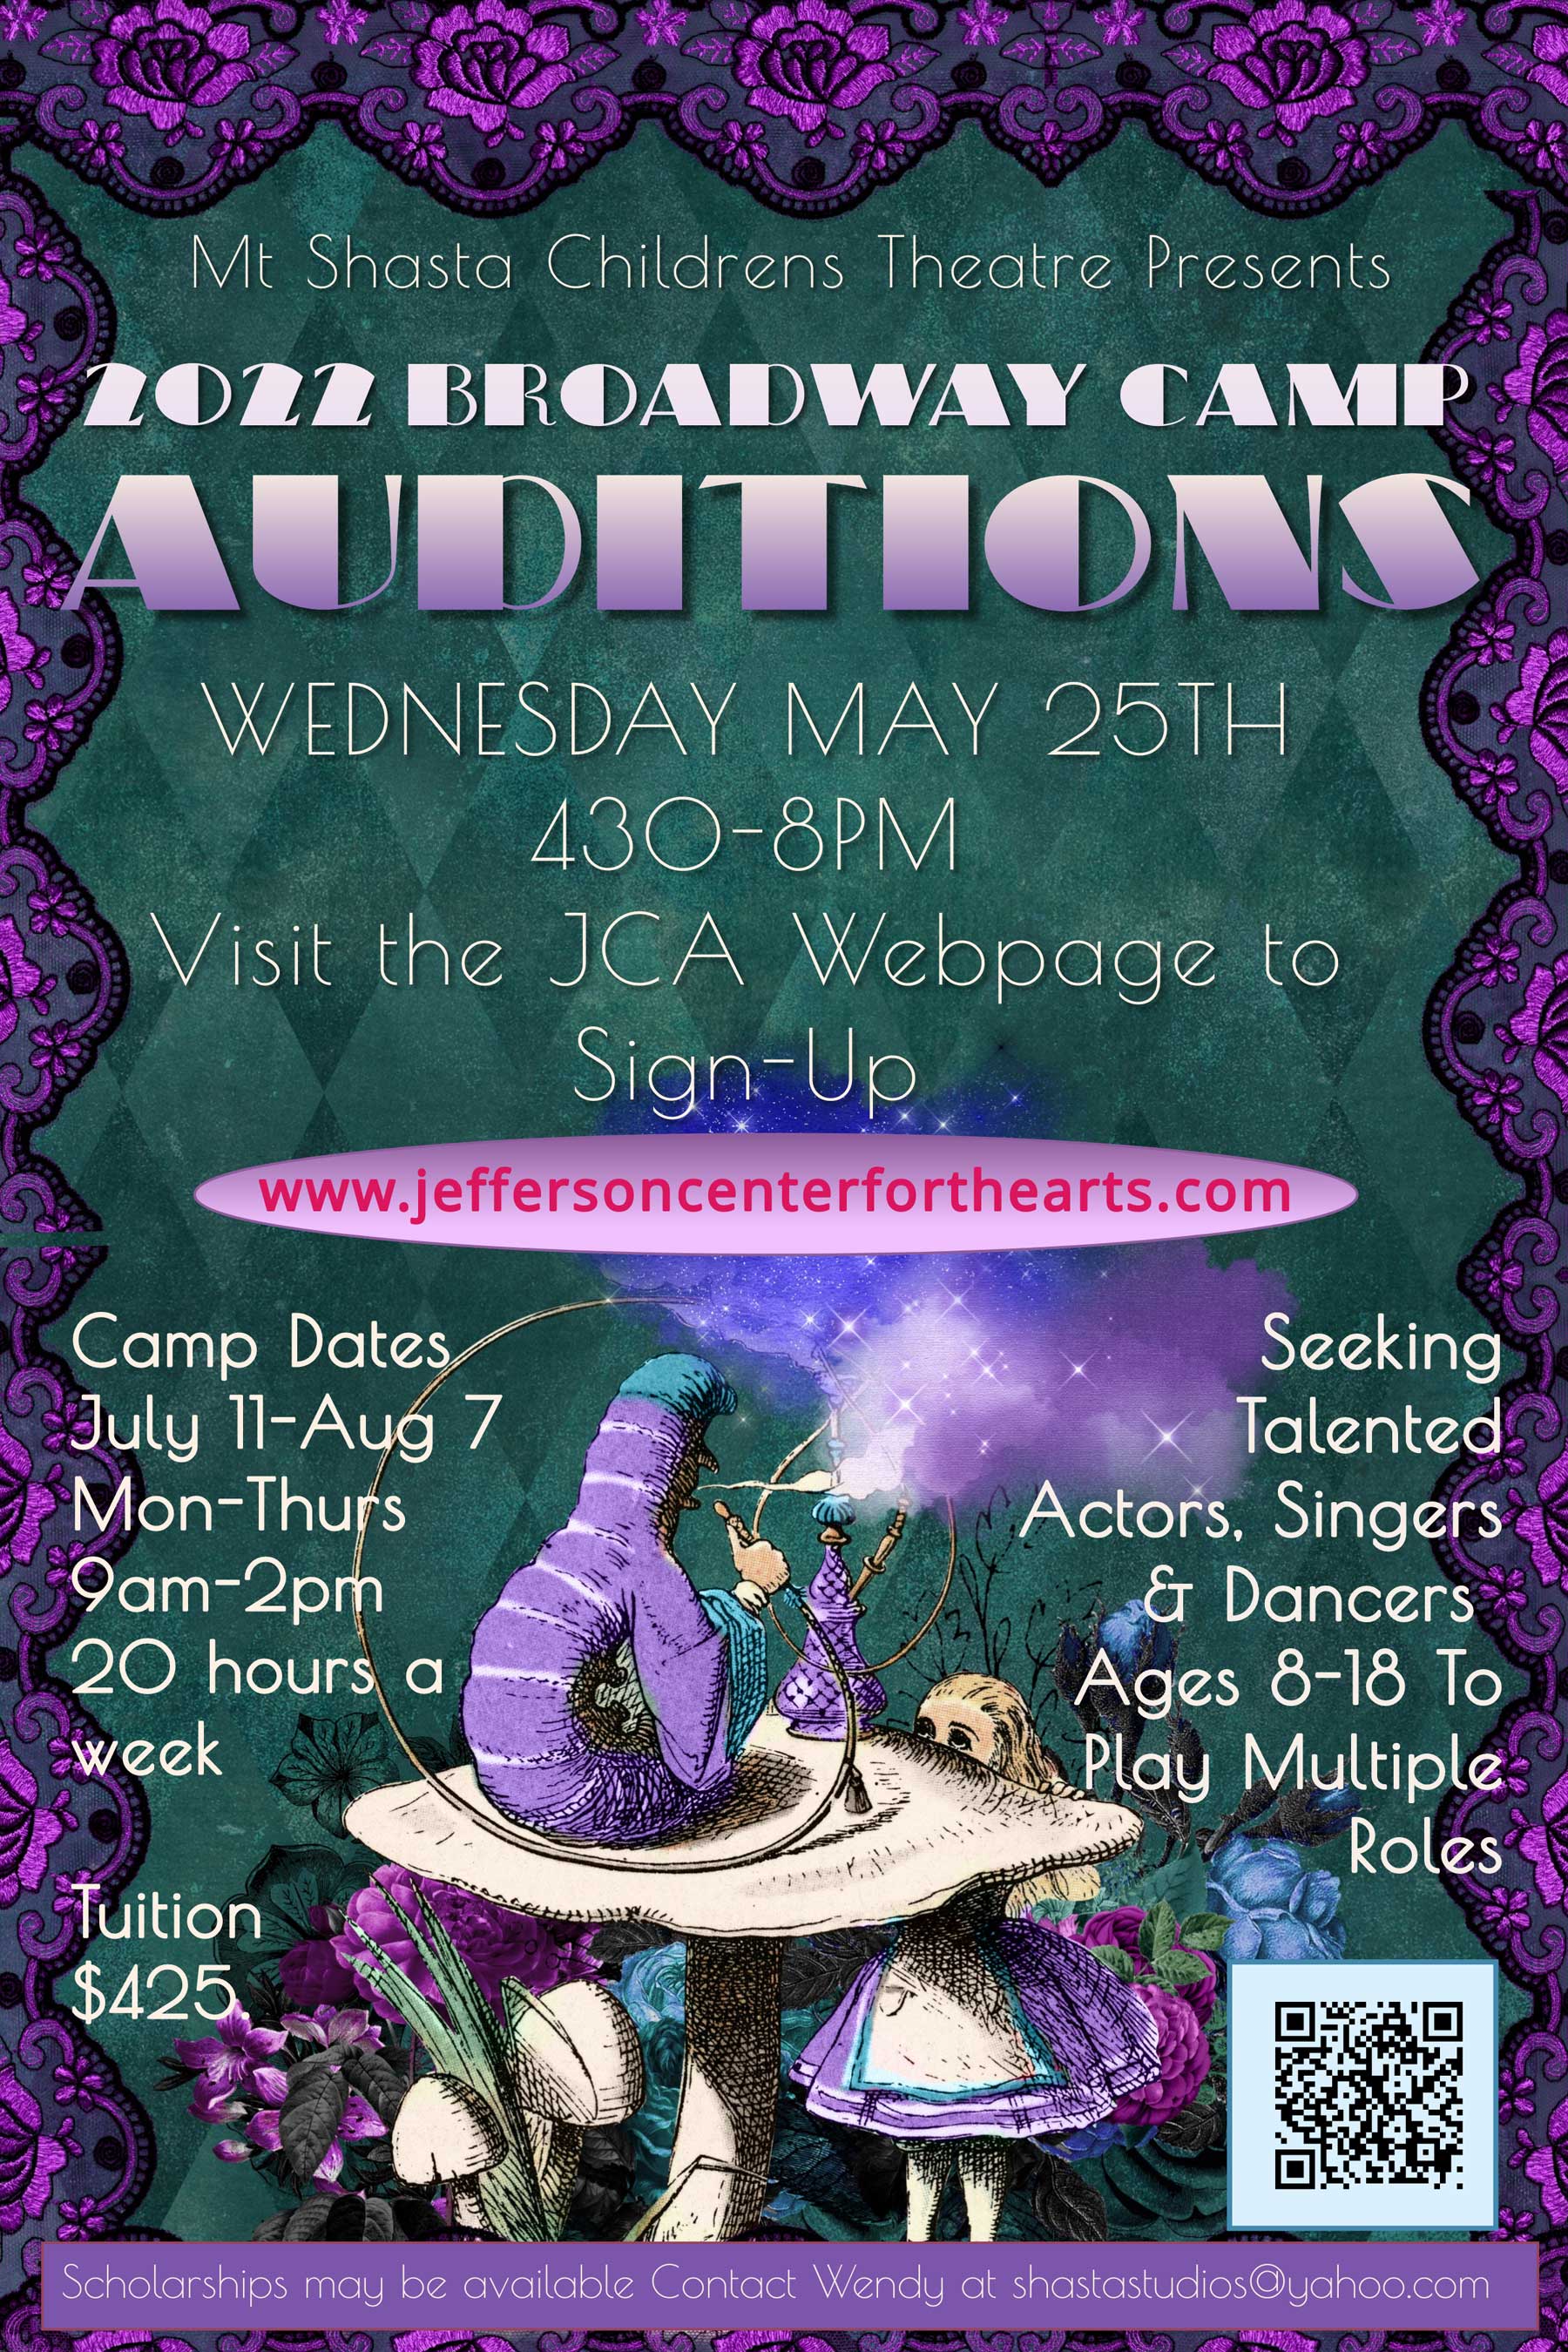 2022 Broadway Camp auditions